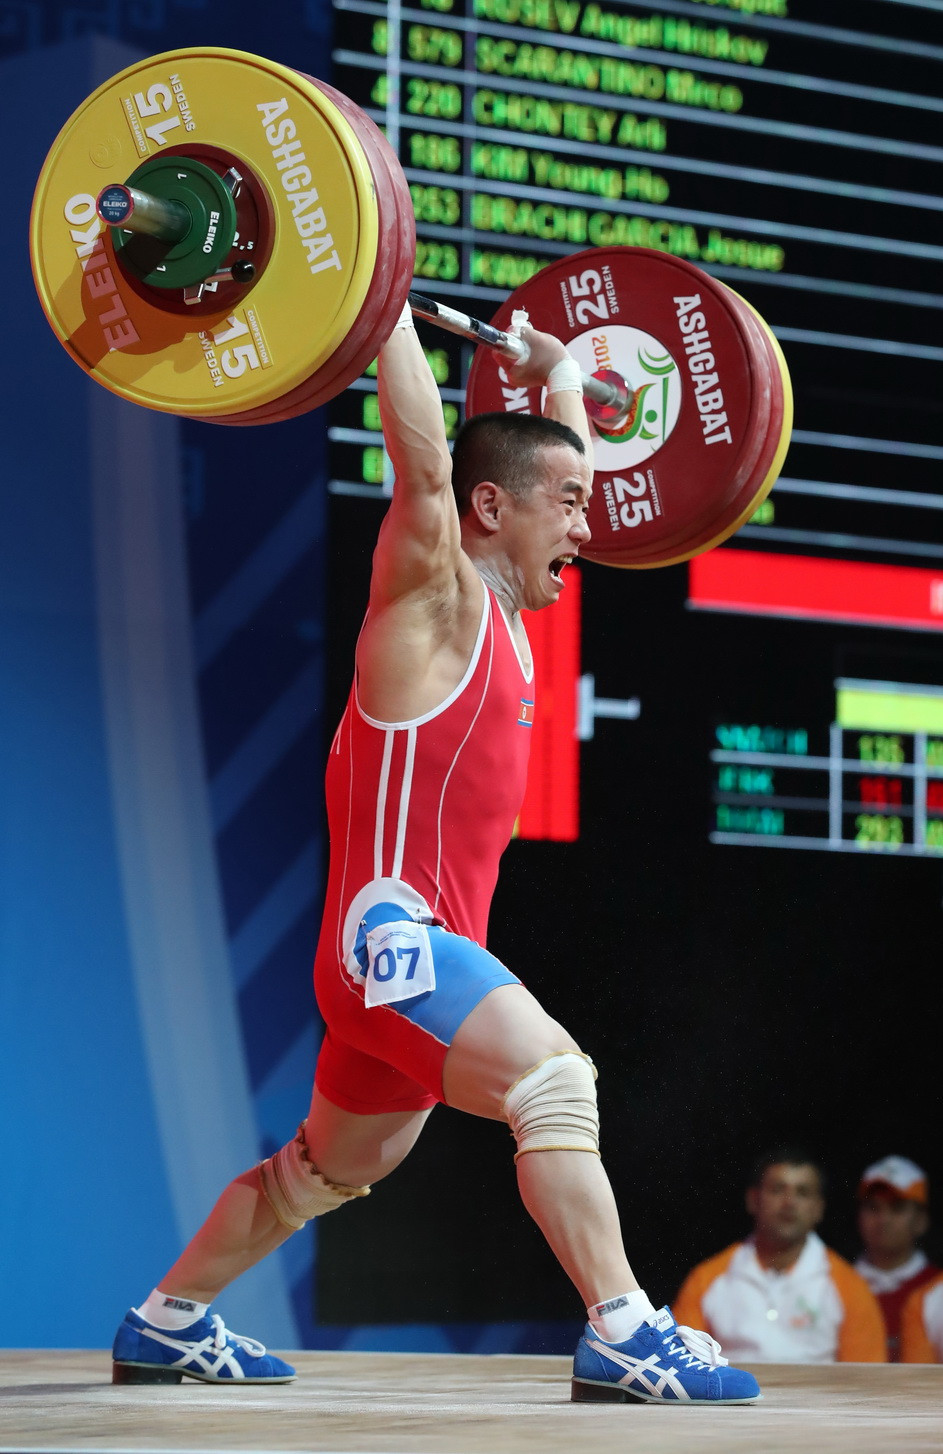 North Korea’s Om Yun Chol broke the men’s 55 kilograms clean and jerk world standard en route to claiming a hat-trick of gold medals on day two of the 2018 IWF World Championships in Ashgabat ©IWF